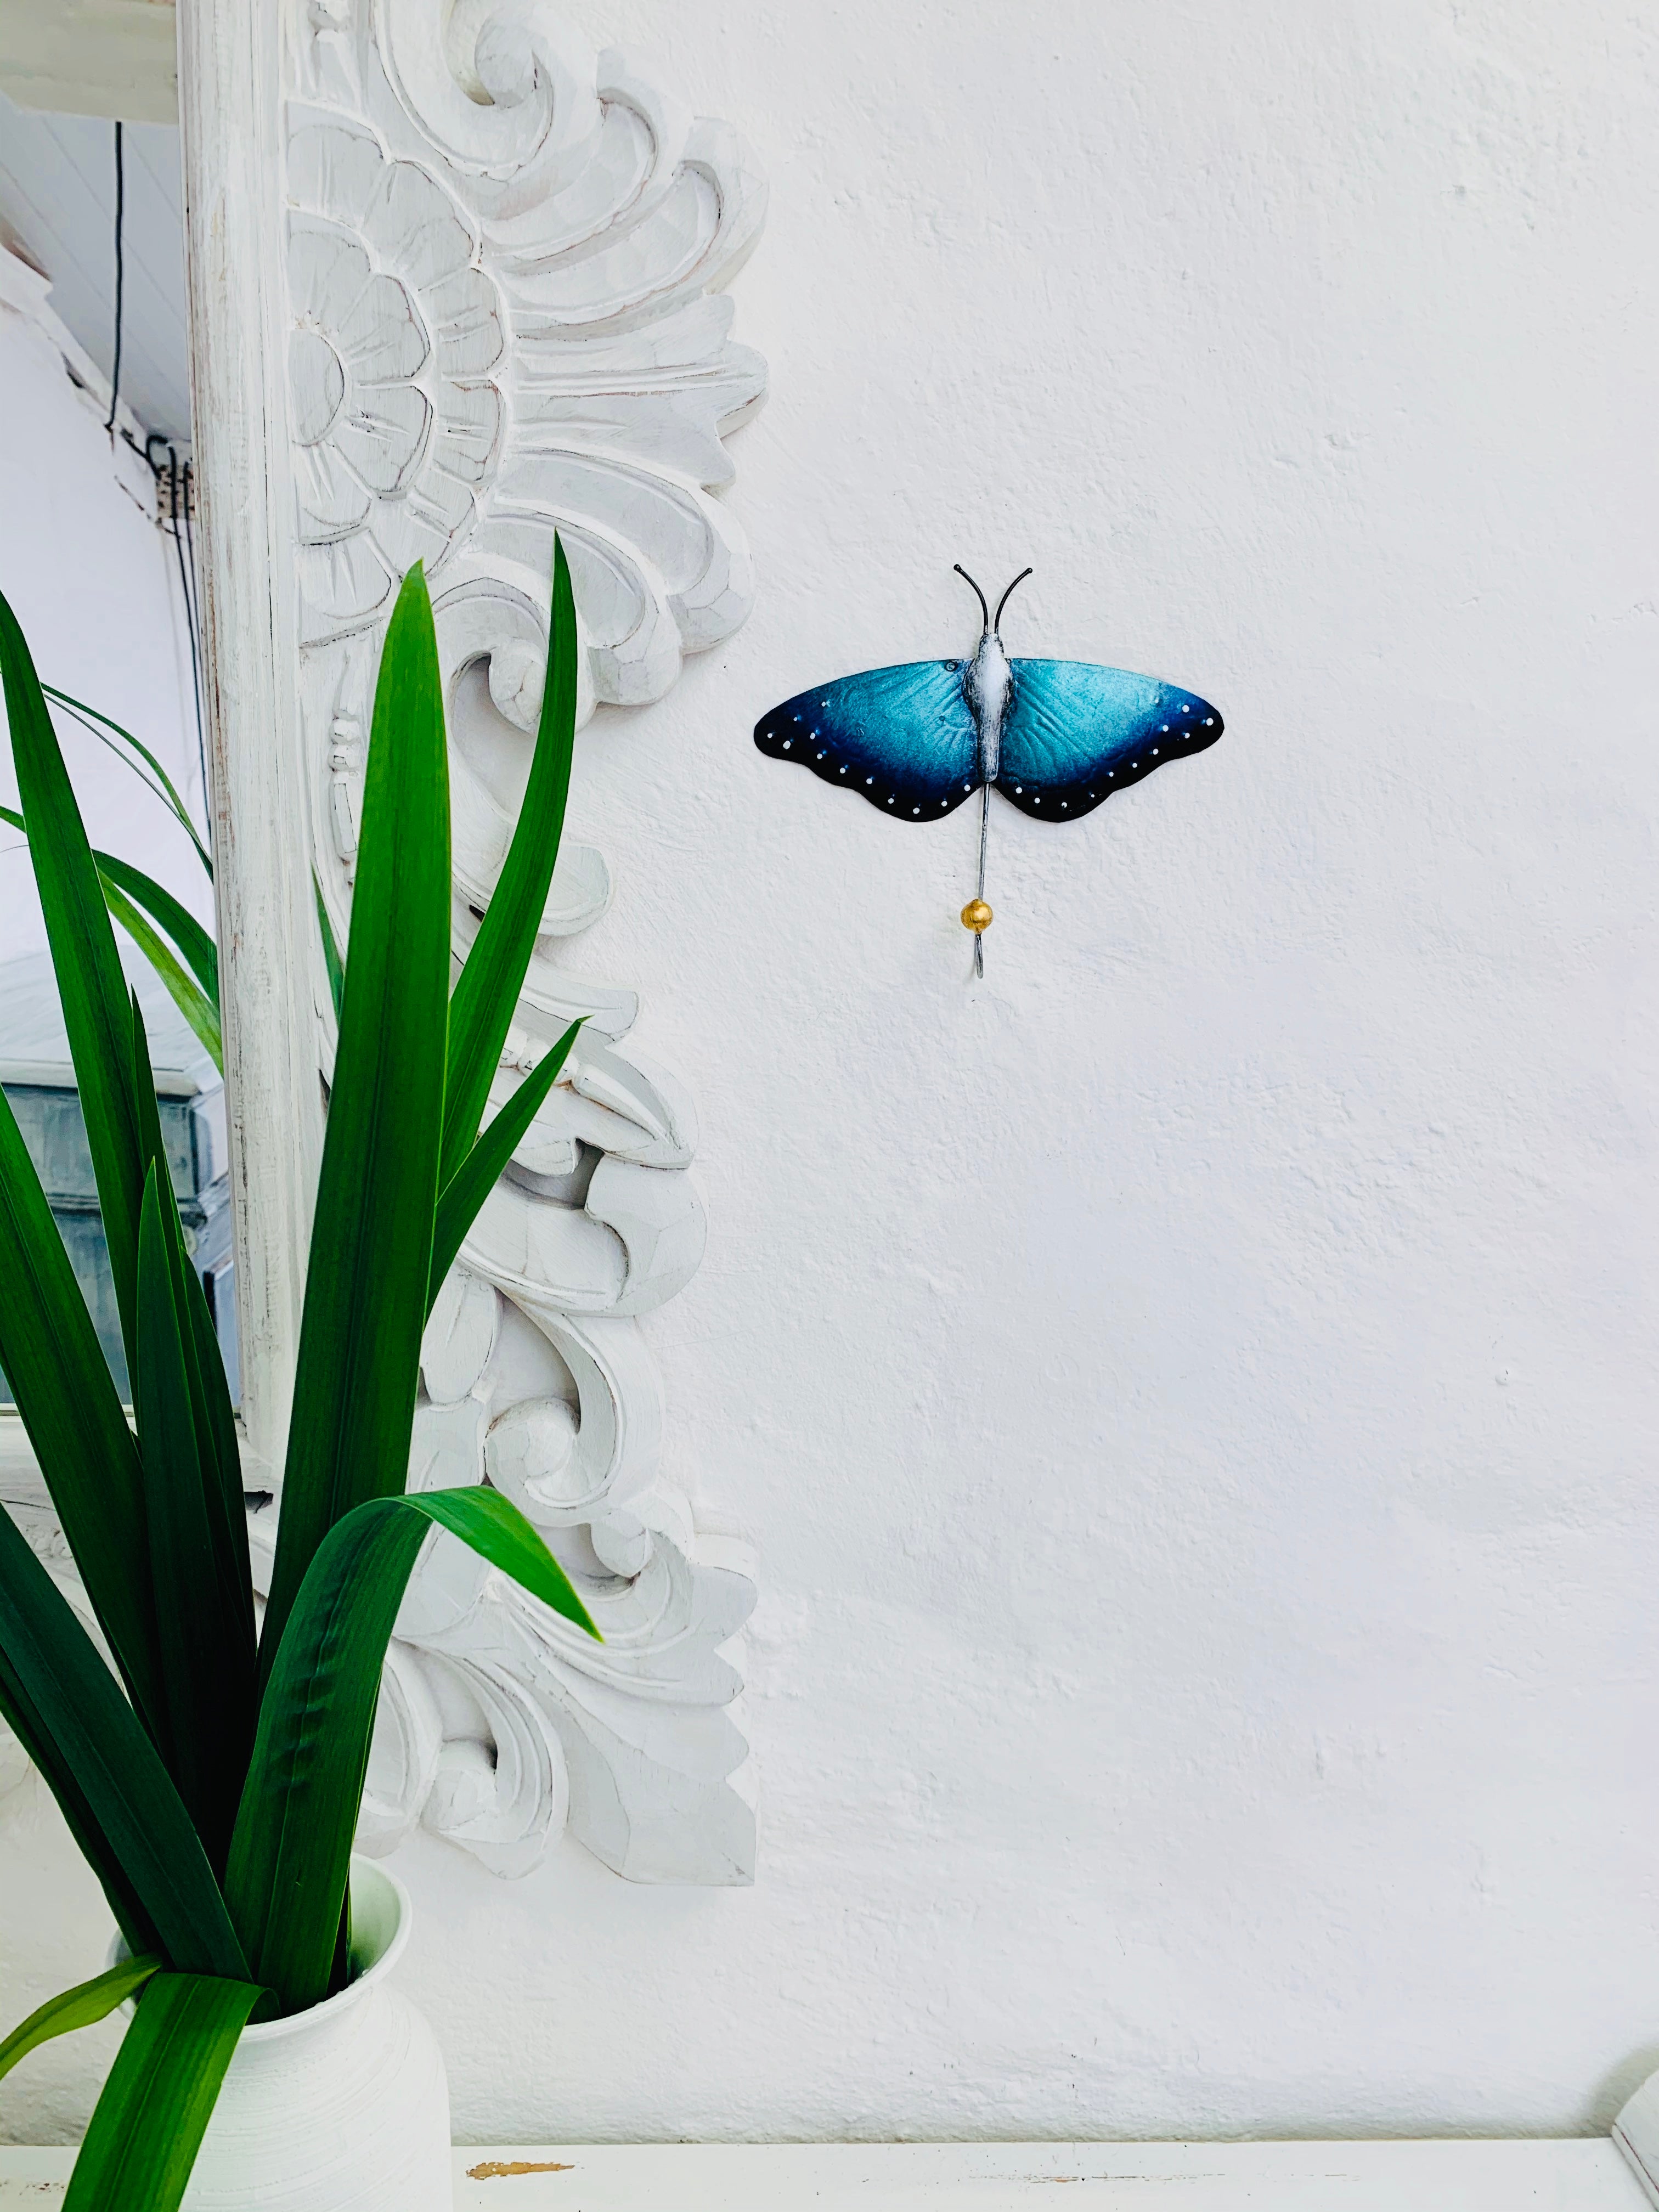 display view of metal butterfly hook in blue on the wall next to a decorative green plant 